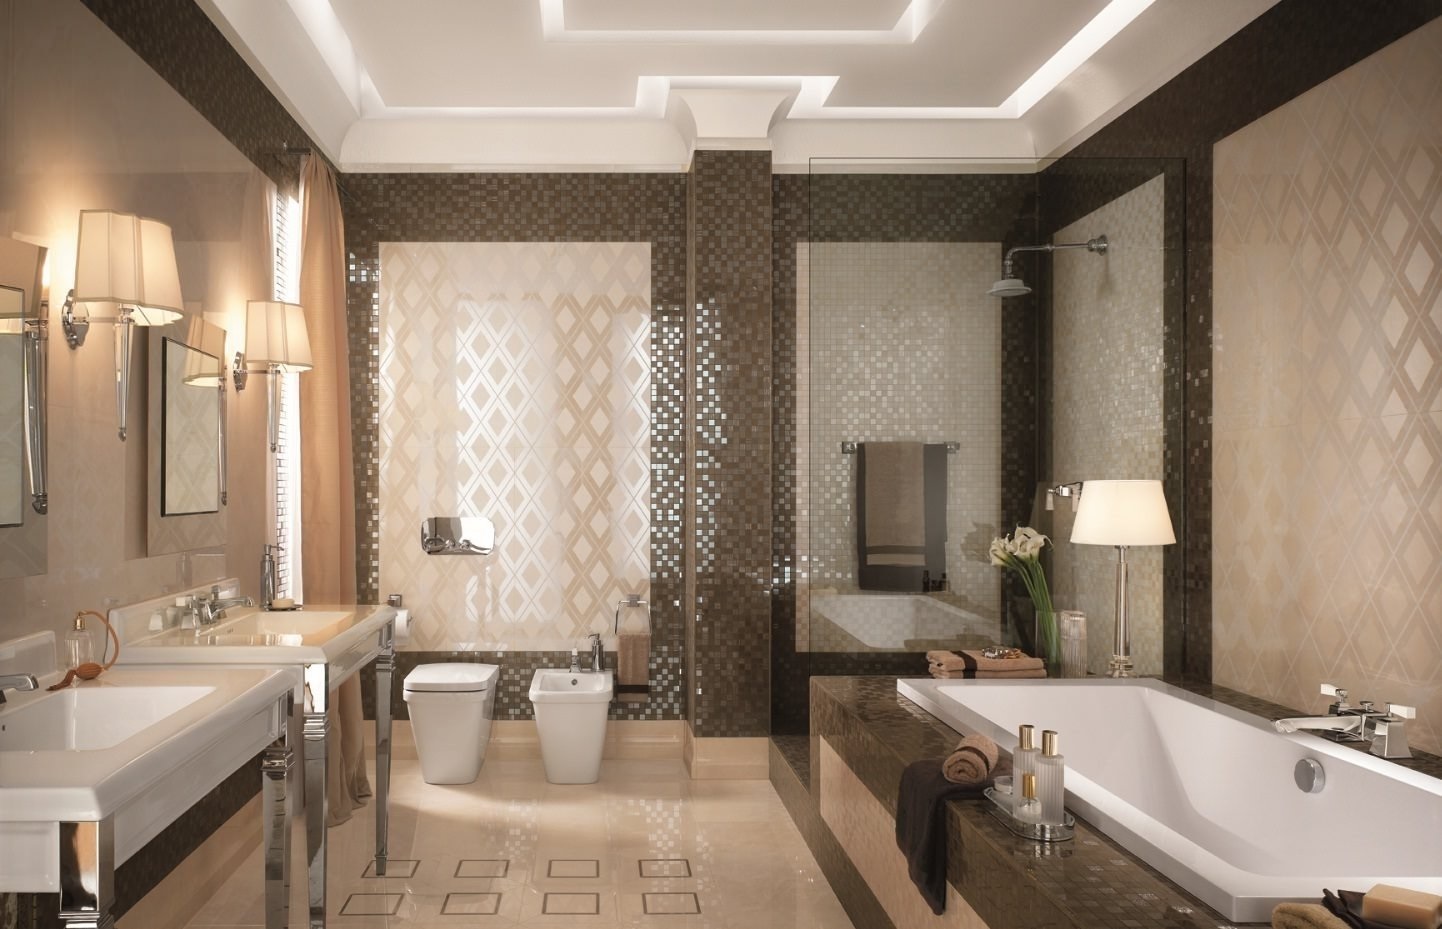 An example of a beautiful bathroom interior in beige color